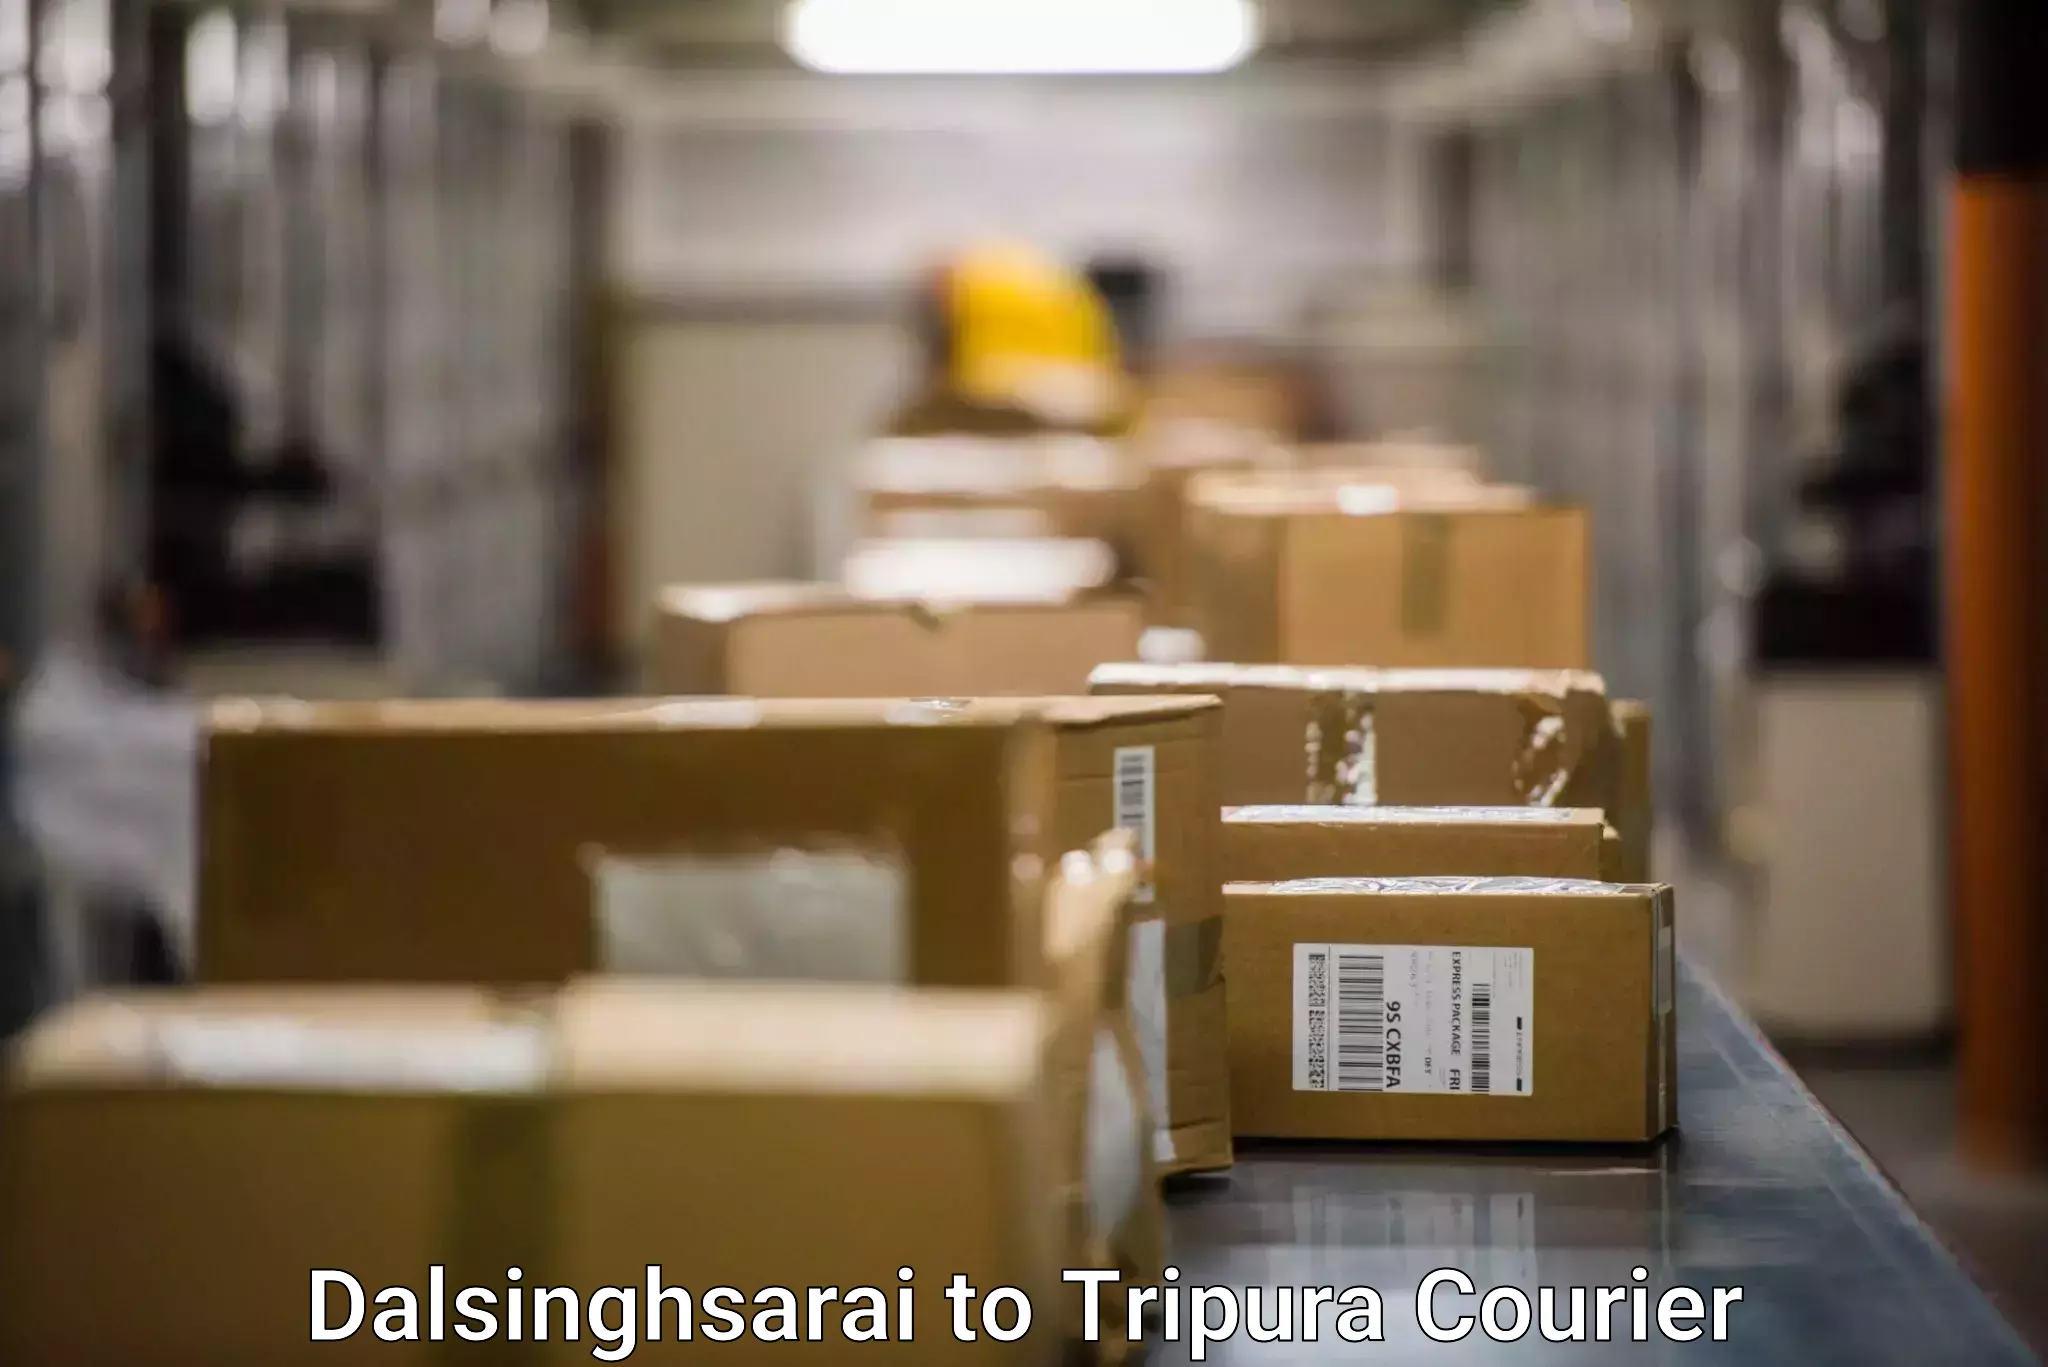 Courier service partnerships Dalsinghsarai to Manughat